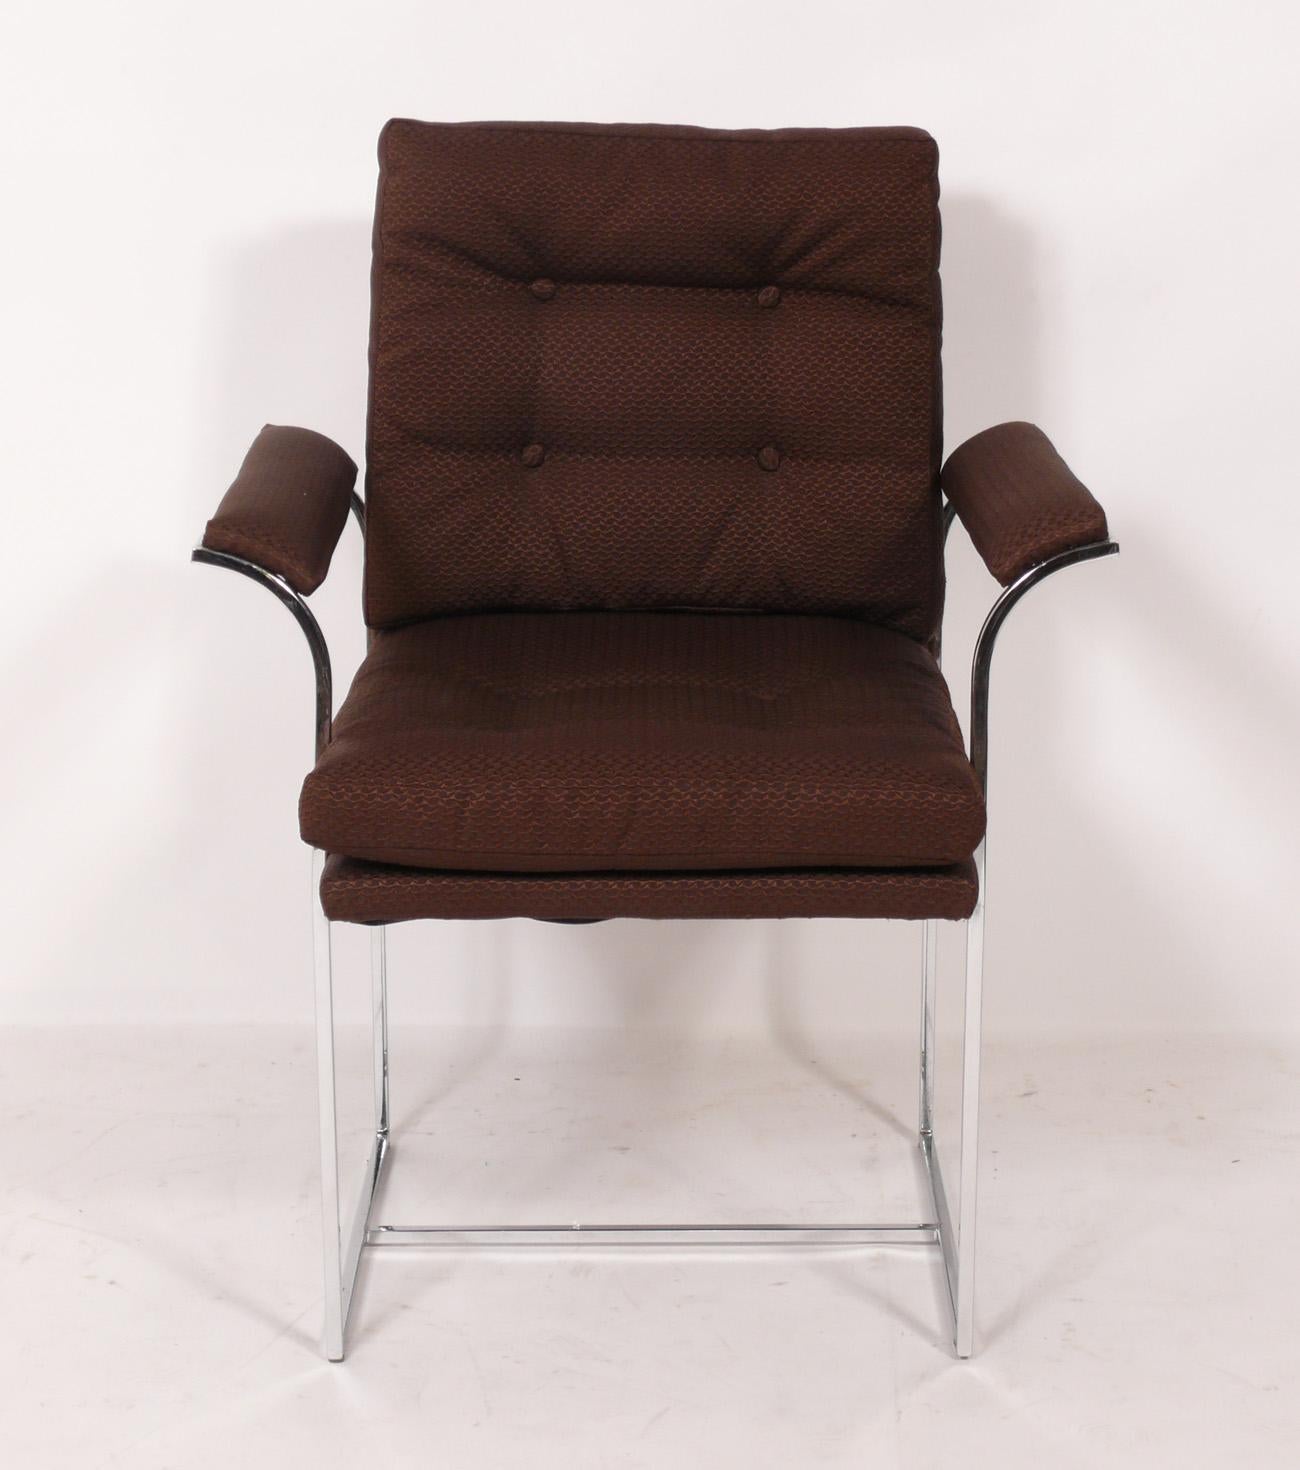 Set of six mid century chrome dining chairs in the style of Milo Baughman, American, circa 1960s. These chairs are currently being reupholstered and can be completed in your fabric. Simply send us 15 yards of your fabric after purchase. The price